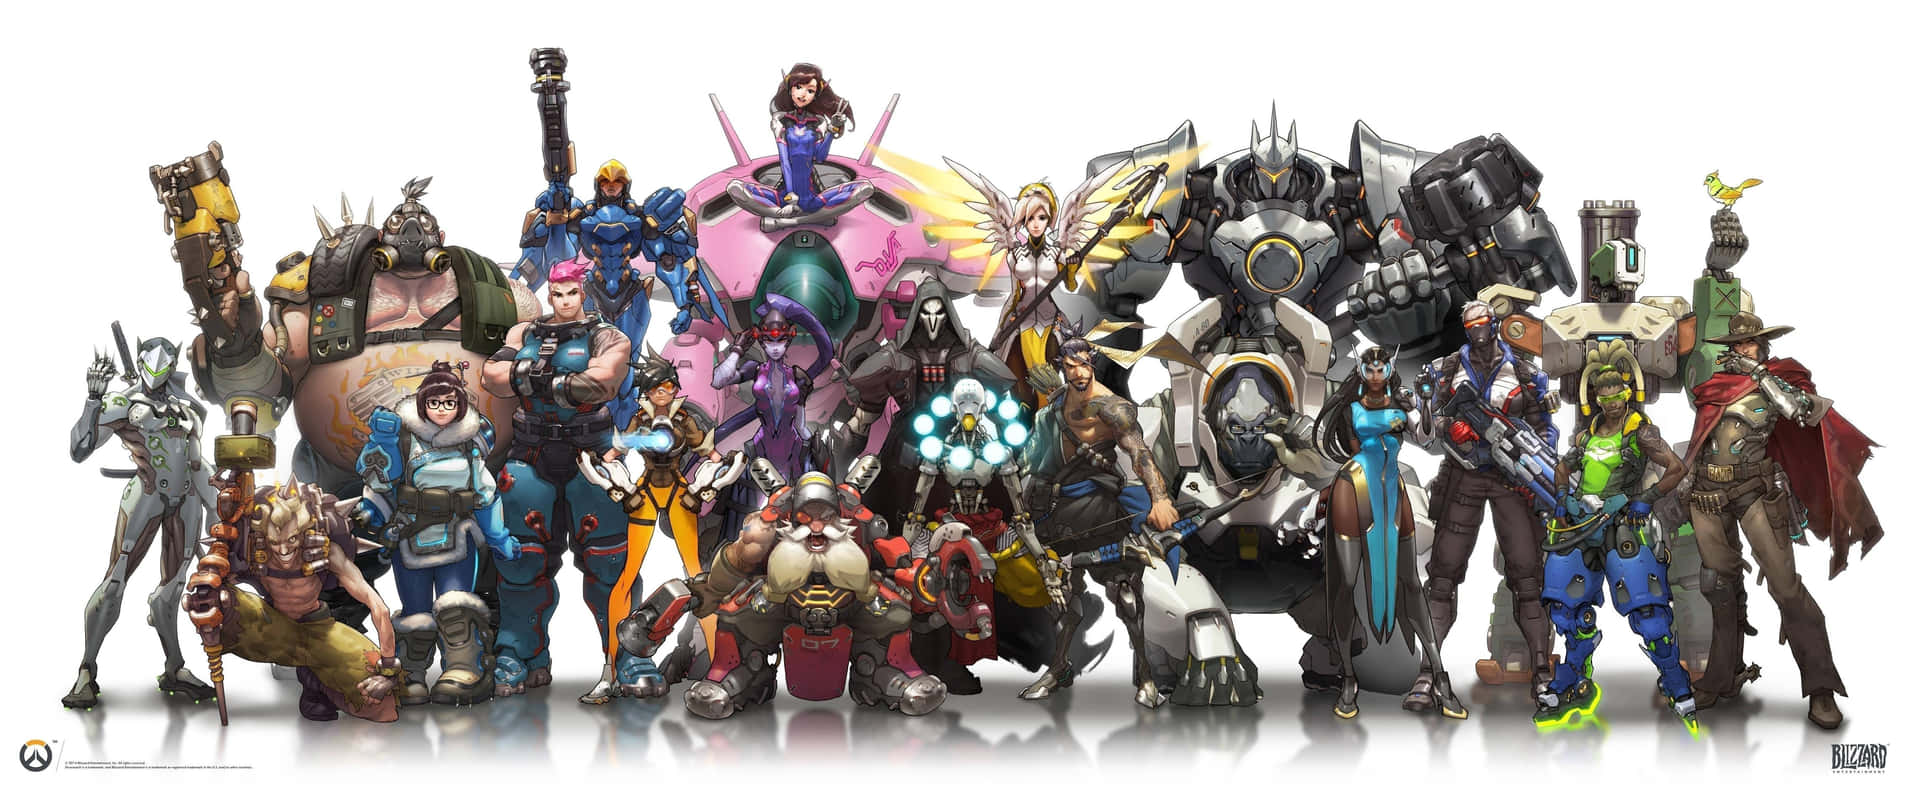 Choose your hero and battle with friends in Overwatch!